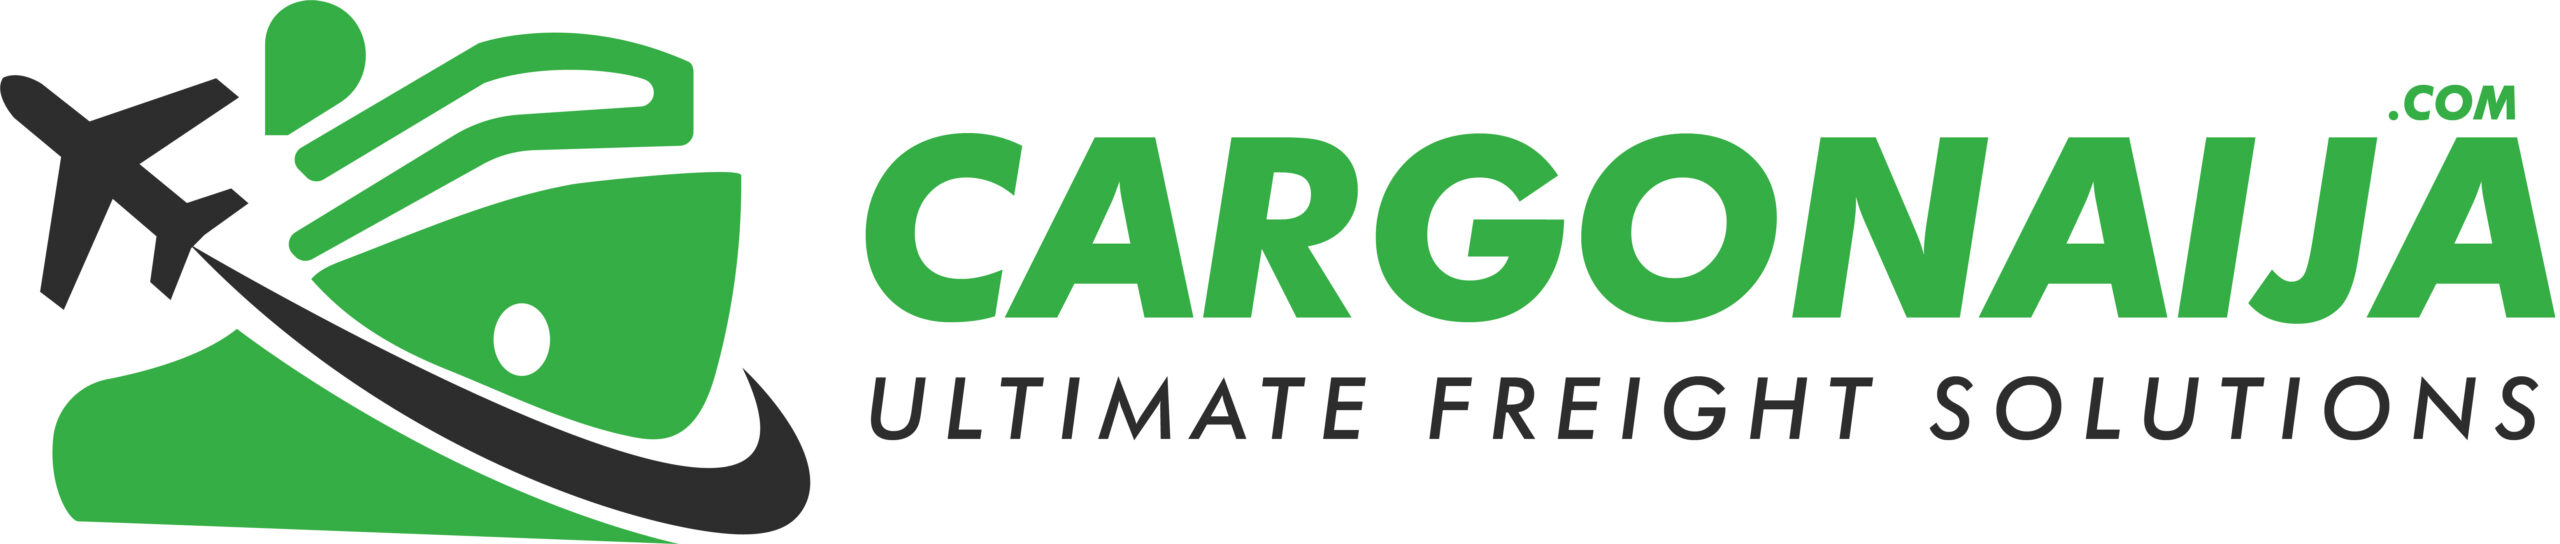 Cargonaija Announces Optimized Freight Solution For Shipping Items From The UK To Uganda 17